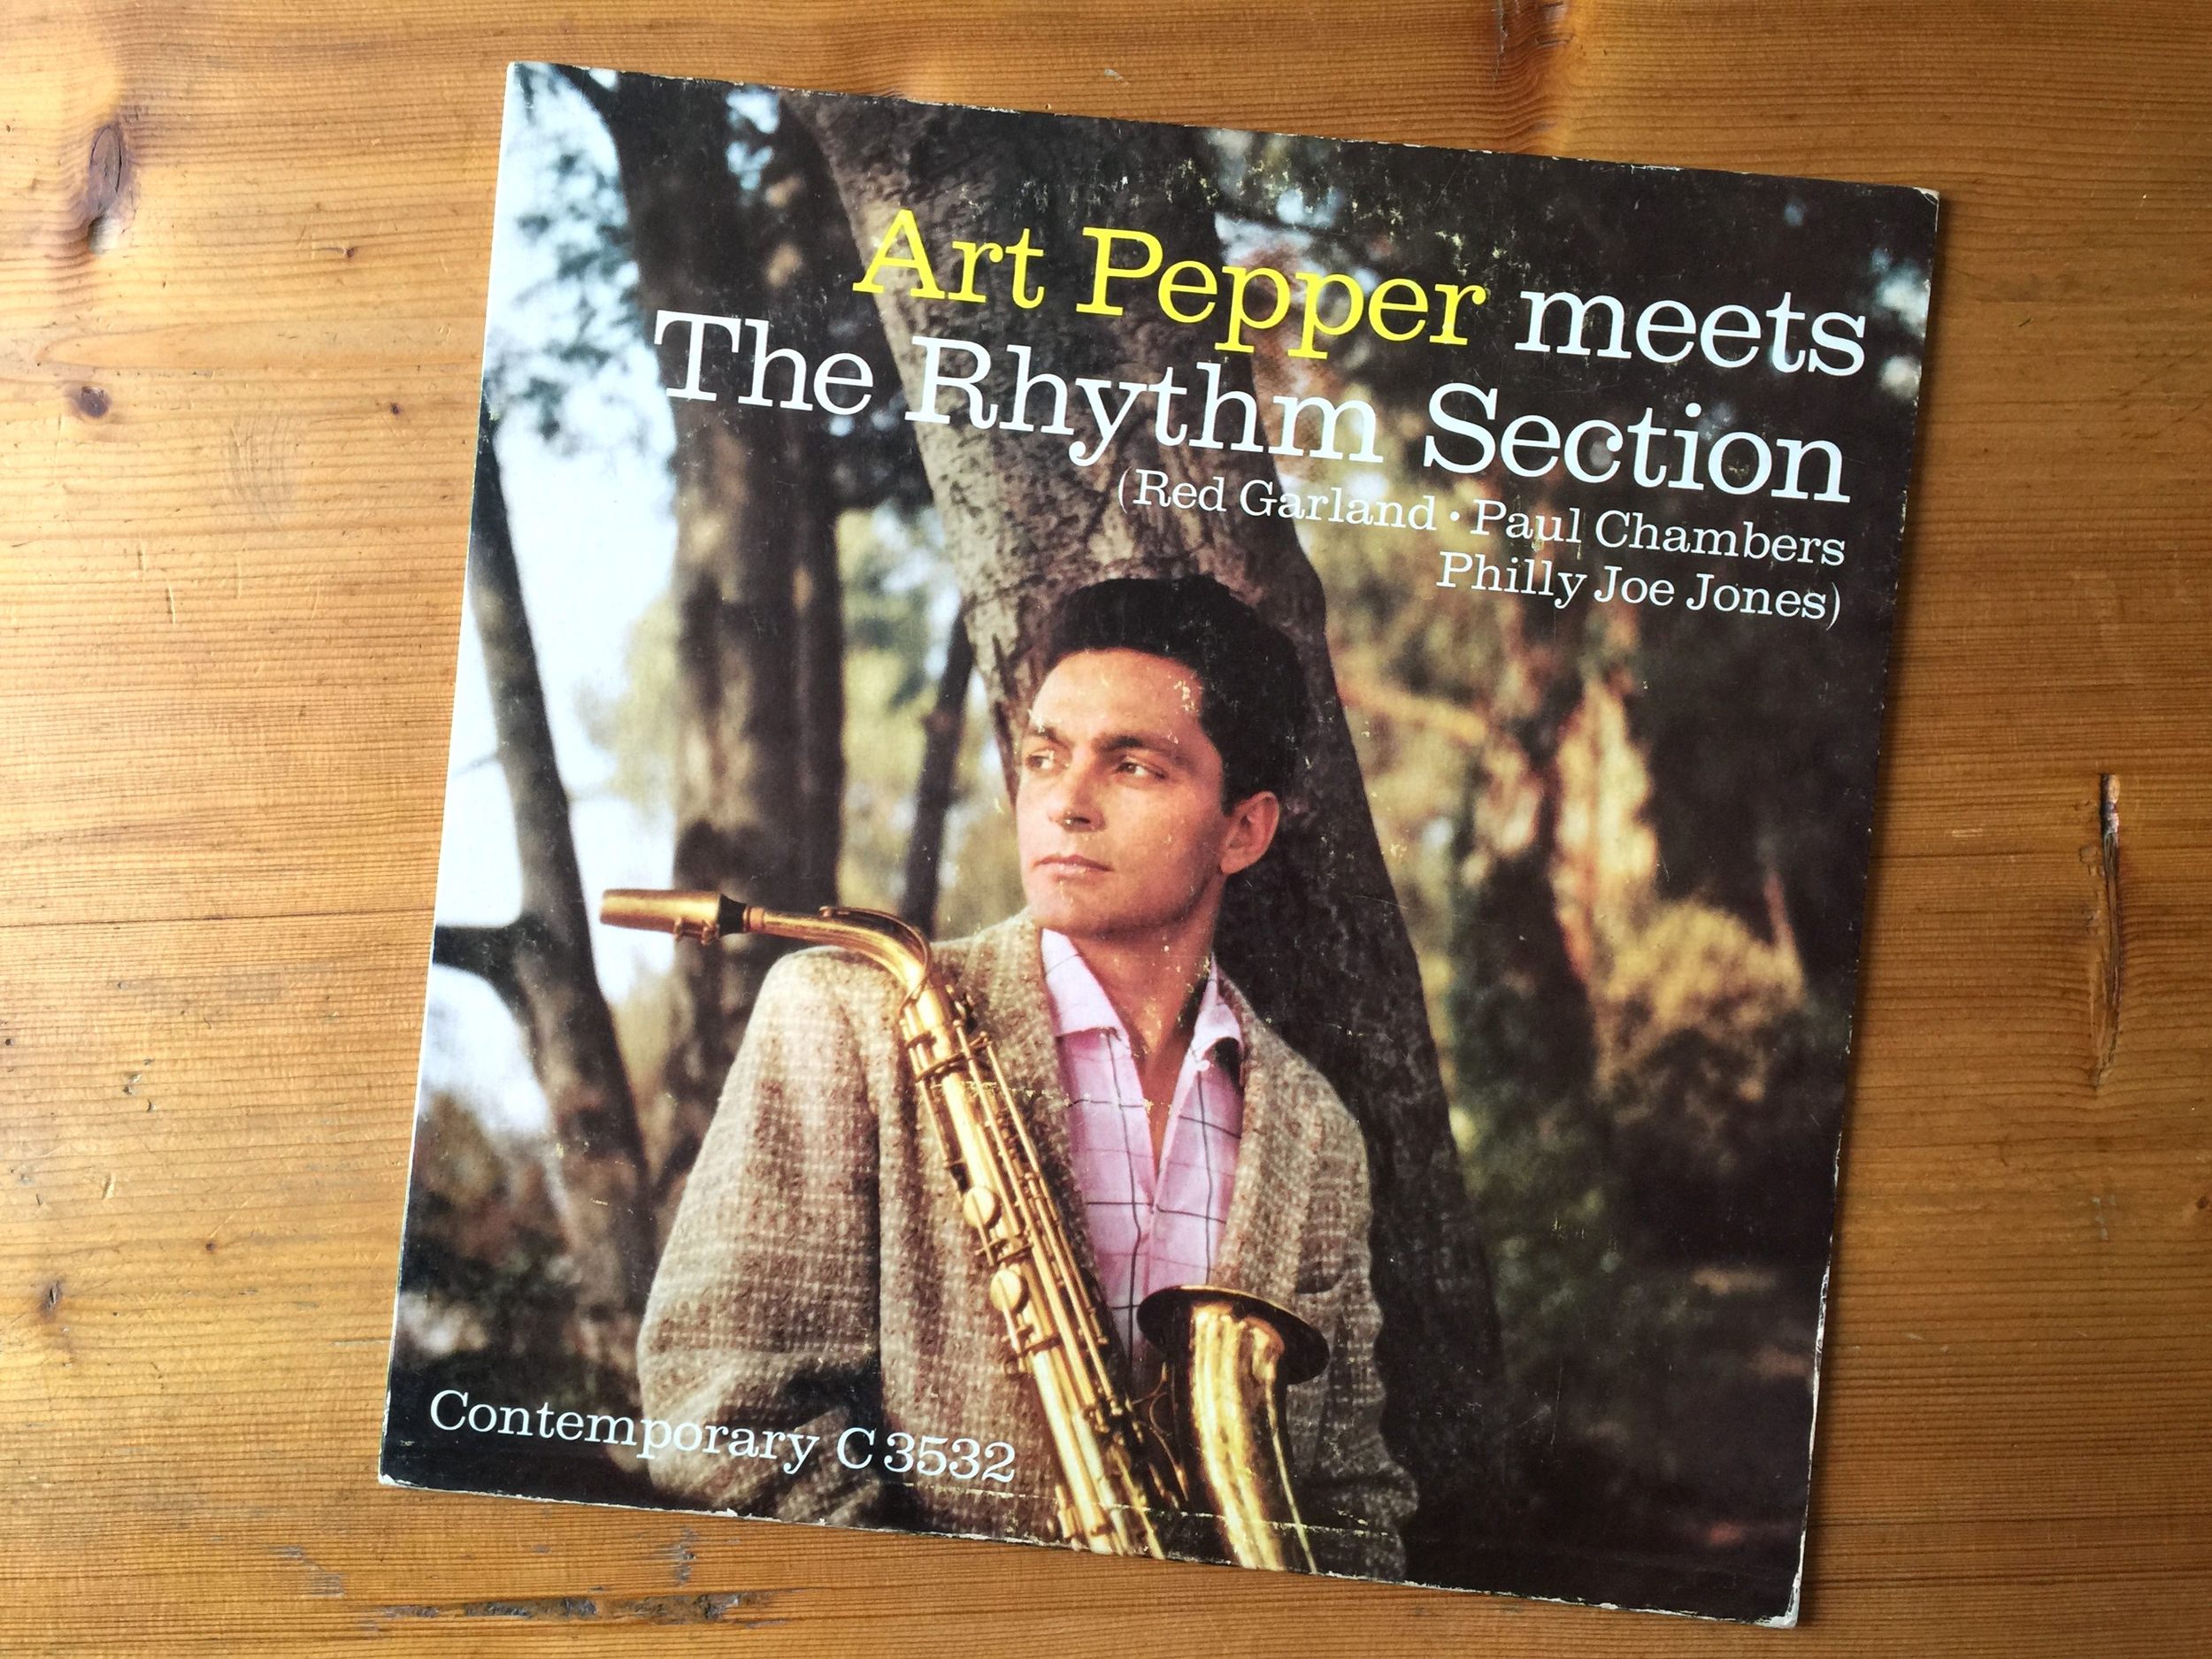 Art Pepper Meets The Section on Contemporary C3532 — FW Rare Jazz Vinyl Collector